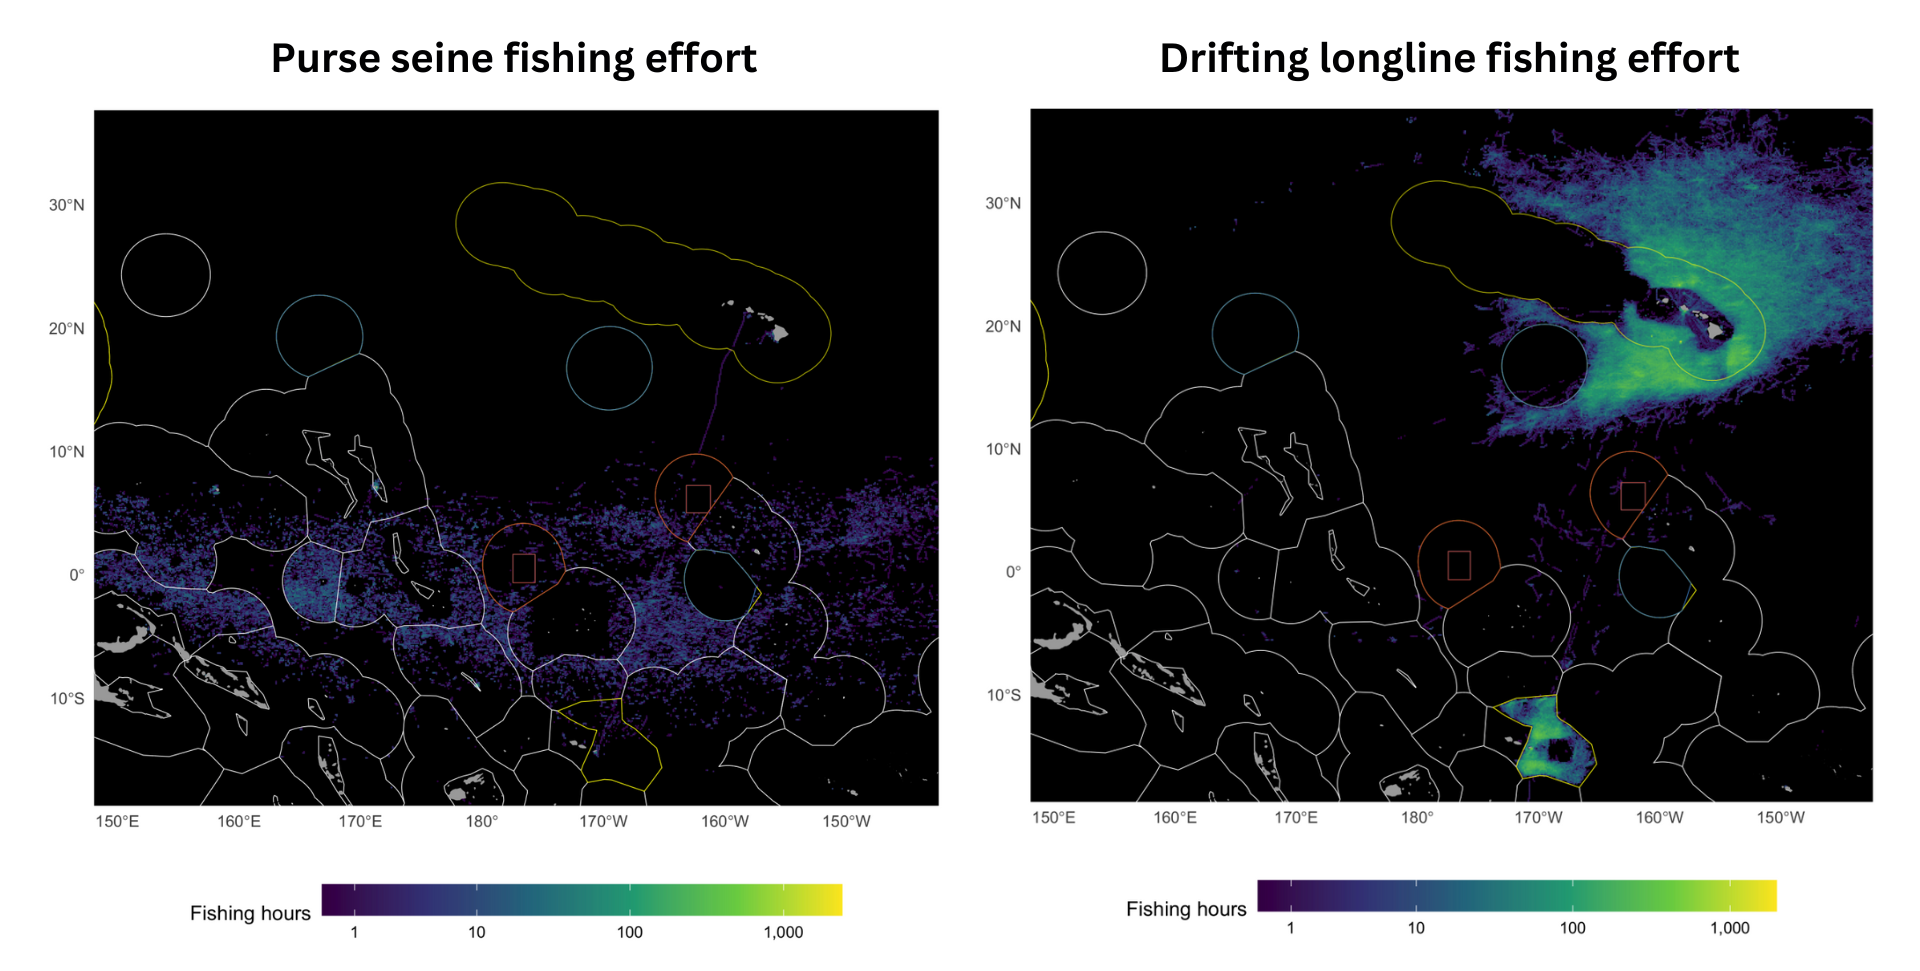 map of fishing effort by purse seine and longline vessels